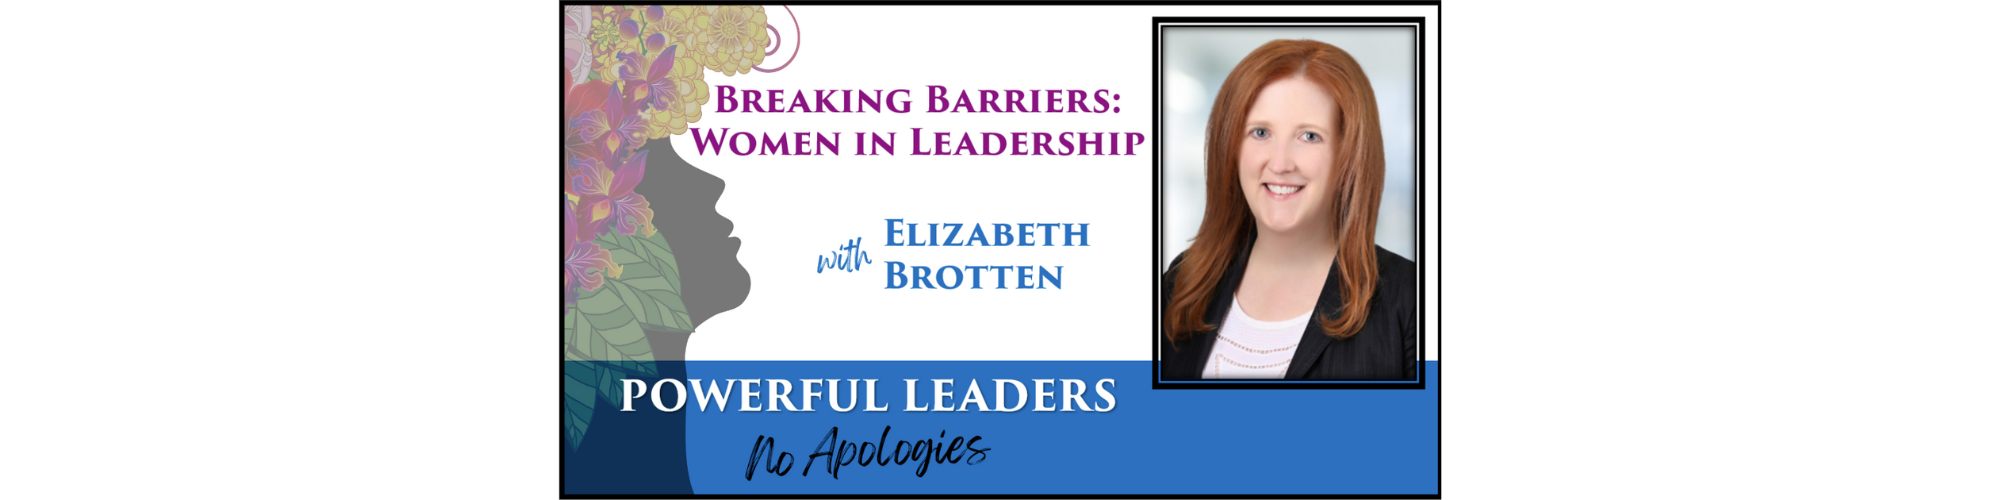 Powerful Leaders, No Apologies Episode #30 Podcast Banner